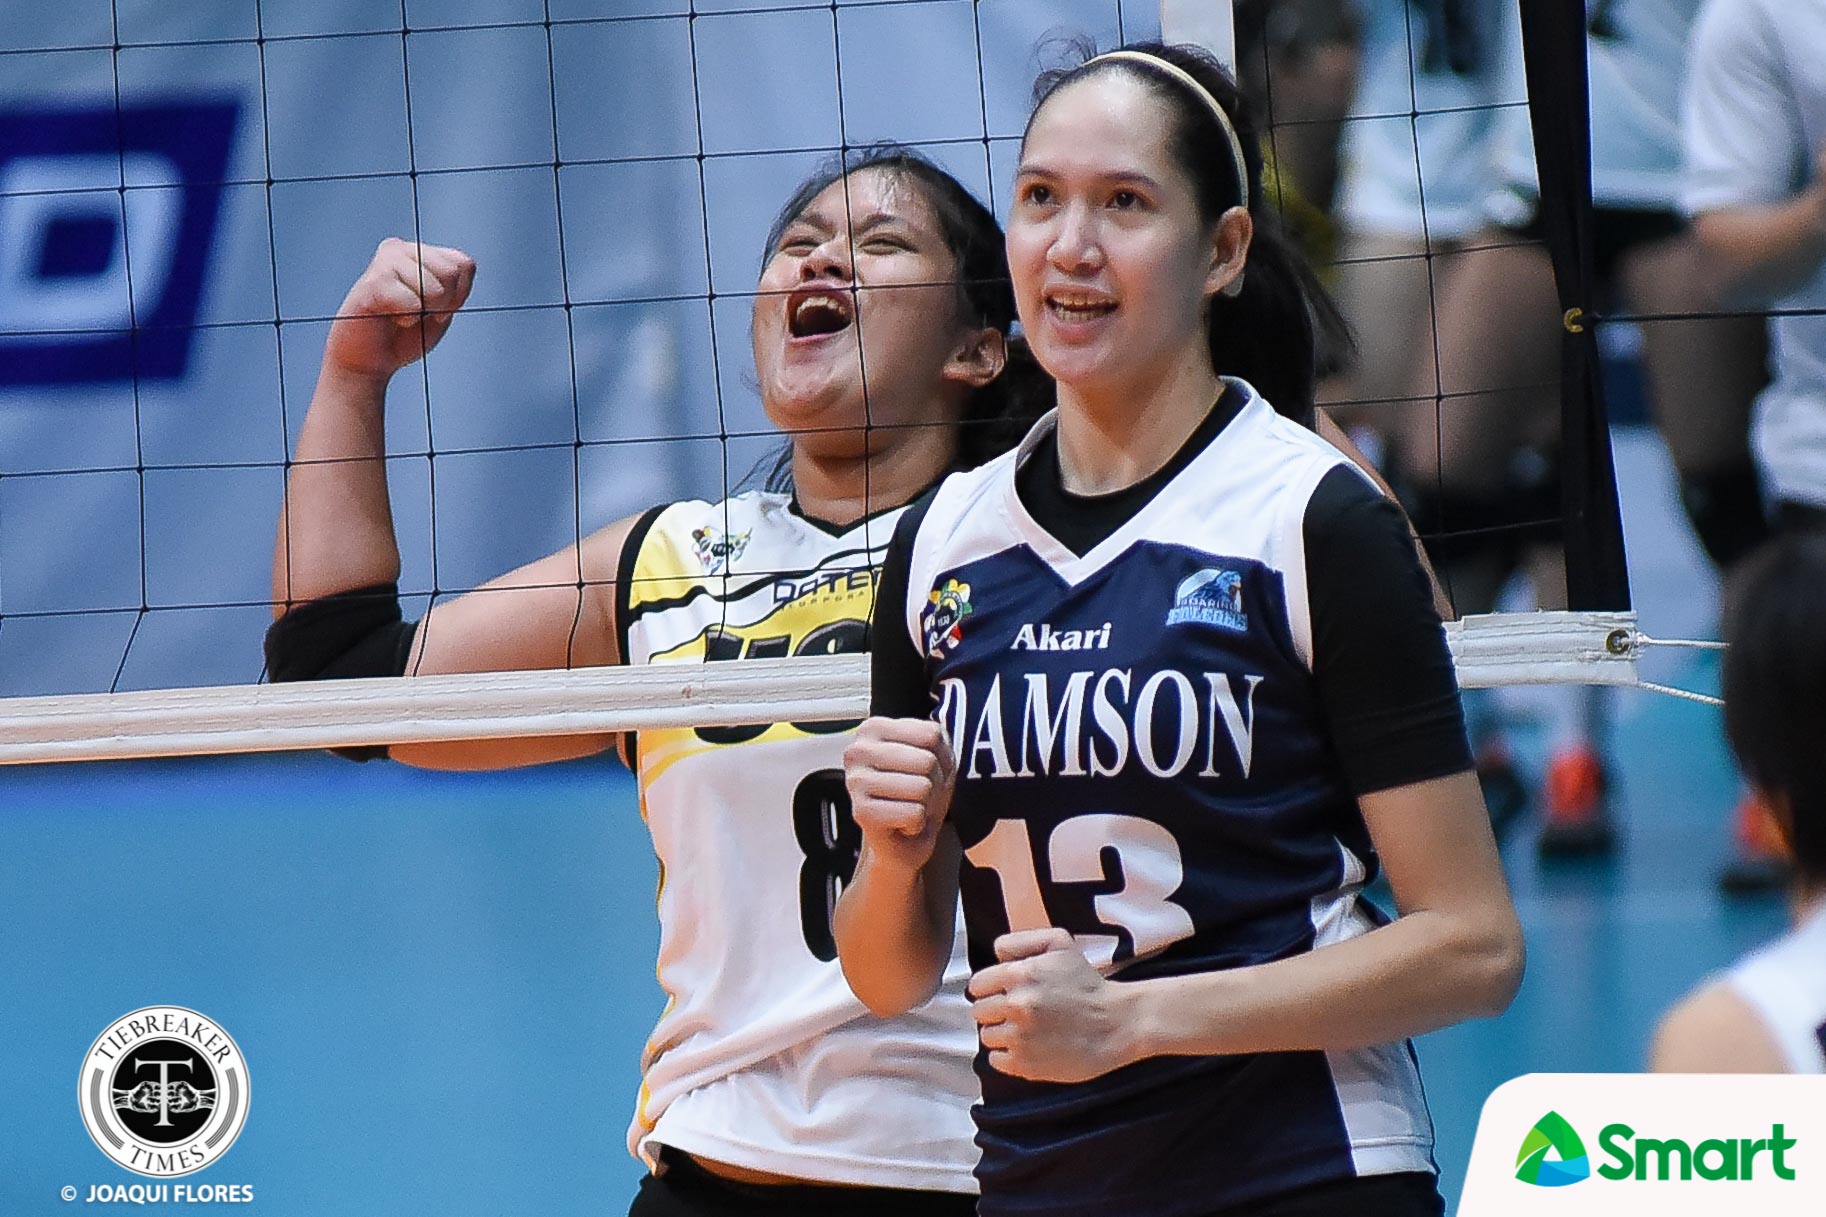 UAAP-80-Volleyball-UST-vs.-ADU-Pacres-3198 Air Padda confident 'intimidated' Lady Falcons will bounce back AdU News UAAP Volleyball  - philippine sports news